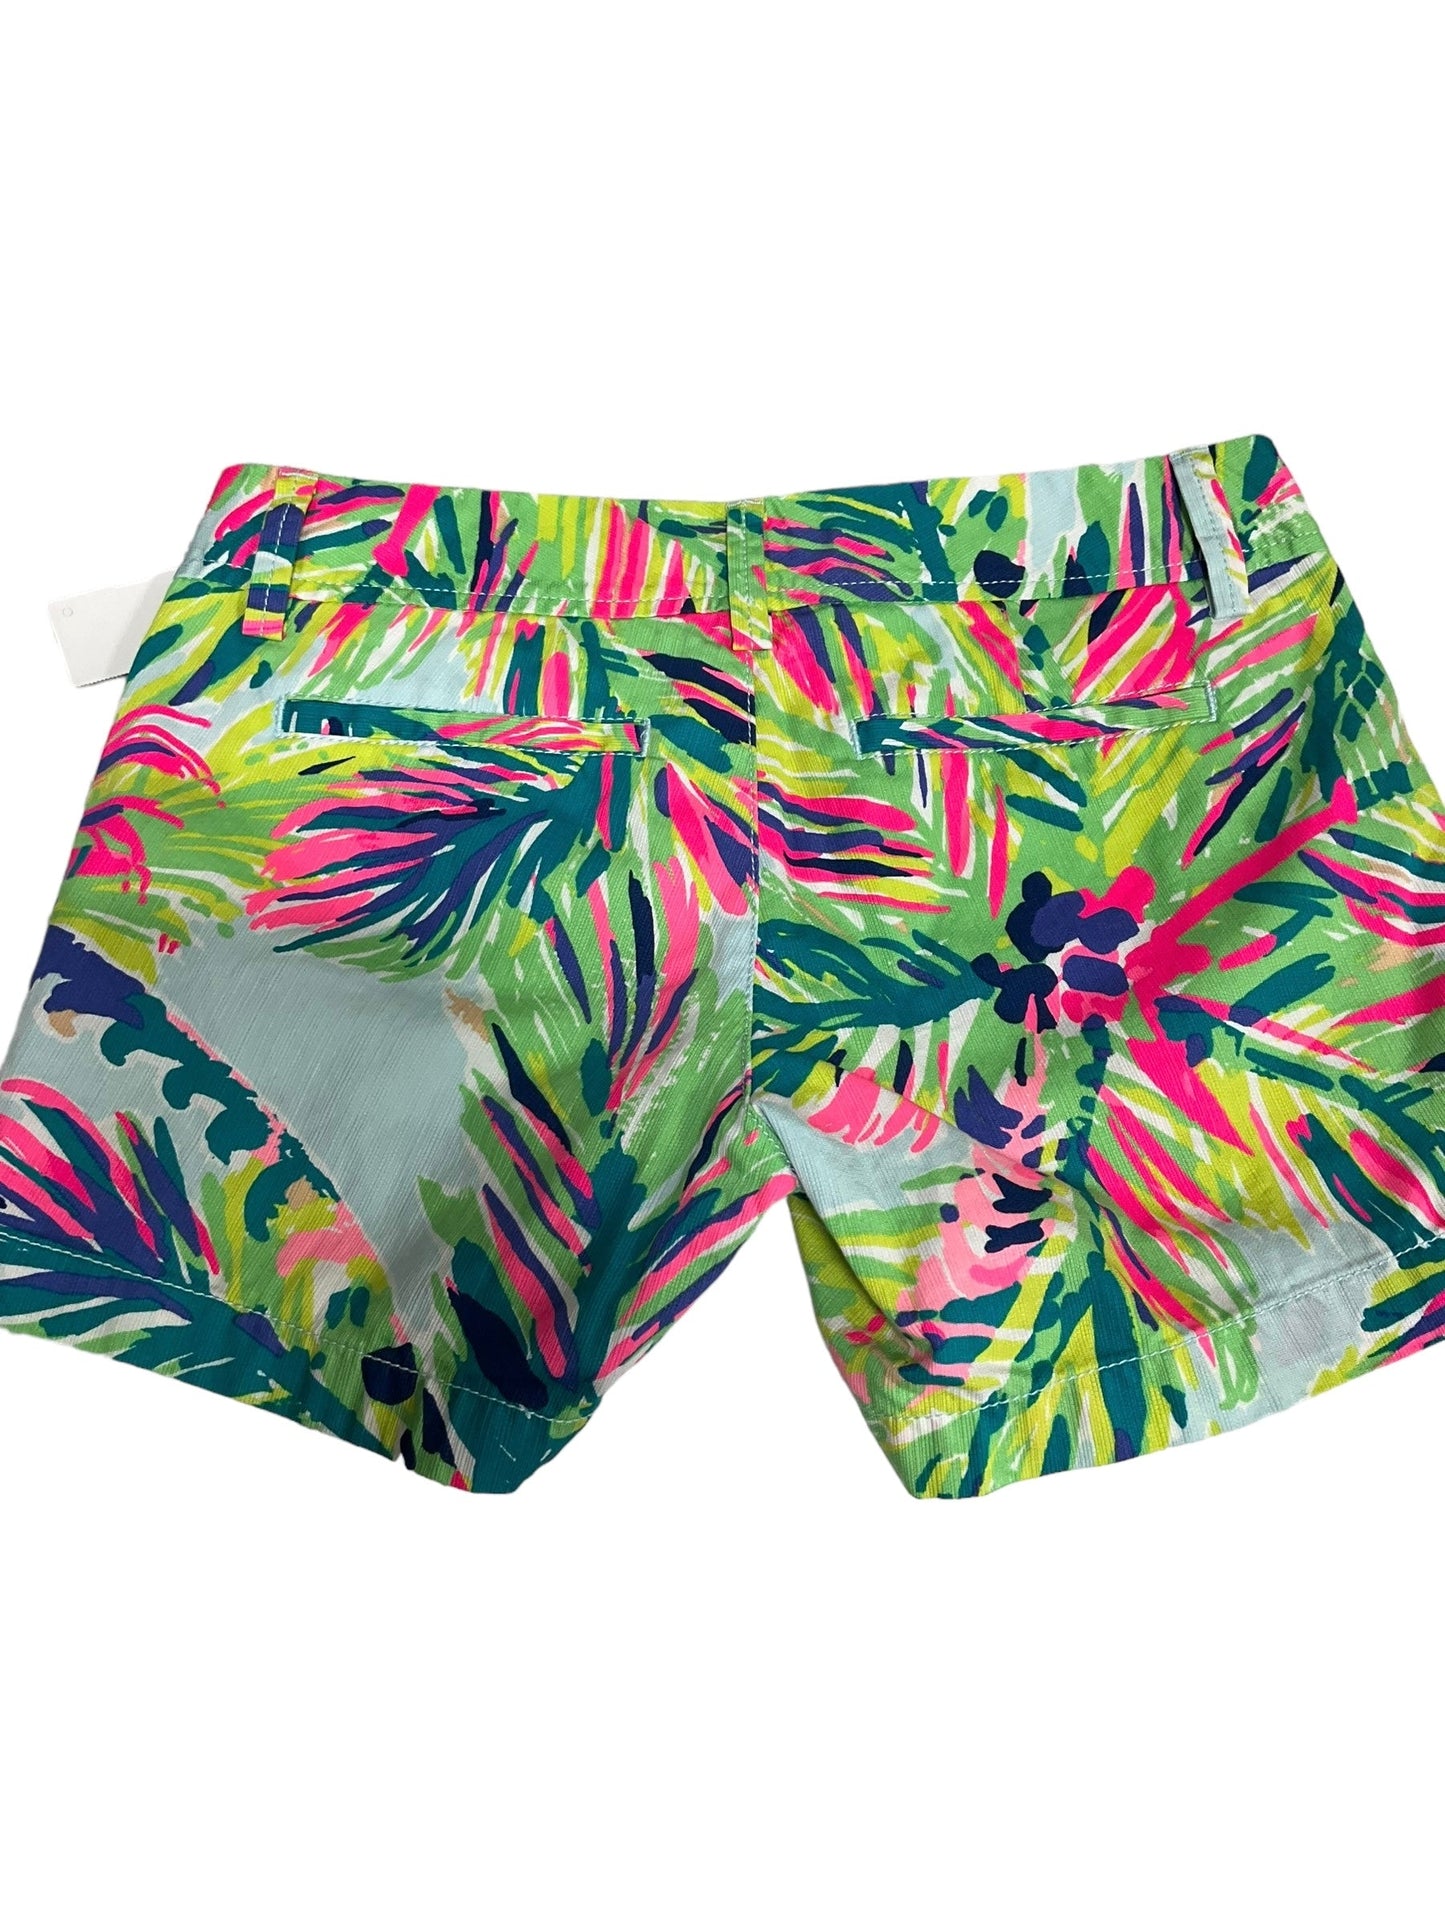 Multi-colored Shorts Designer Lilly Pulitzer, Size 2